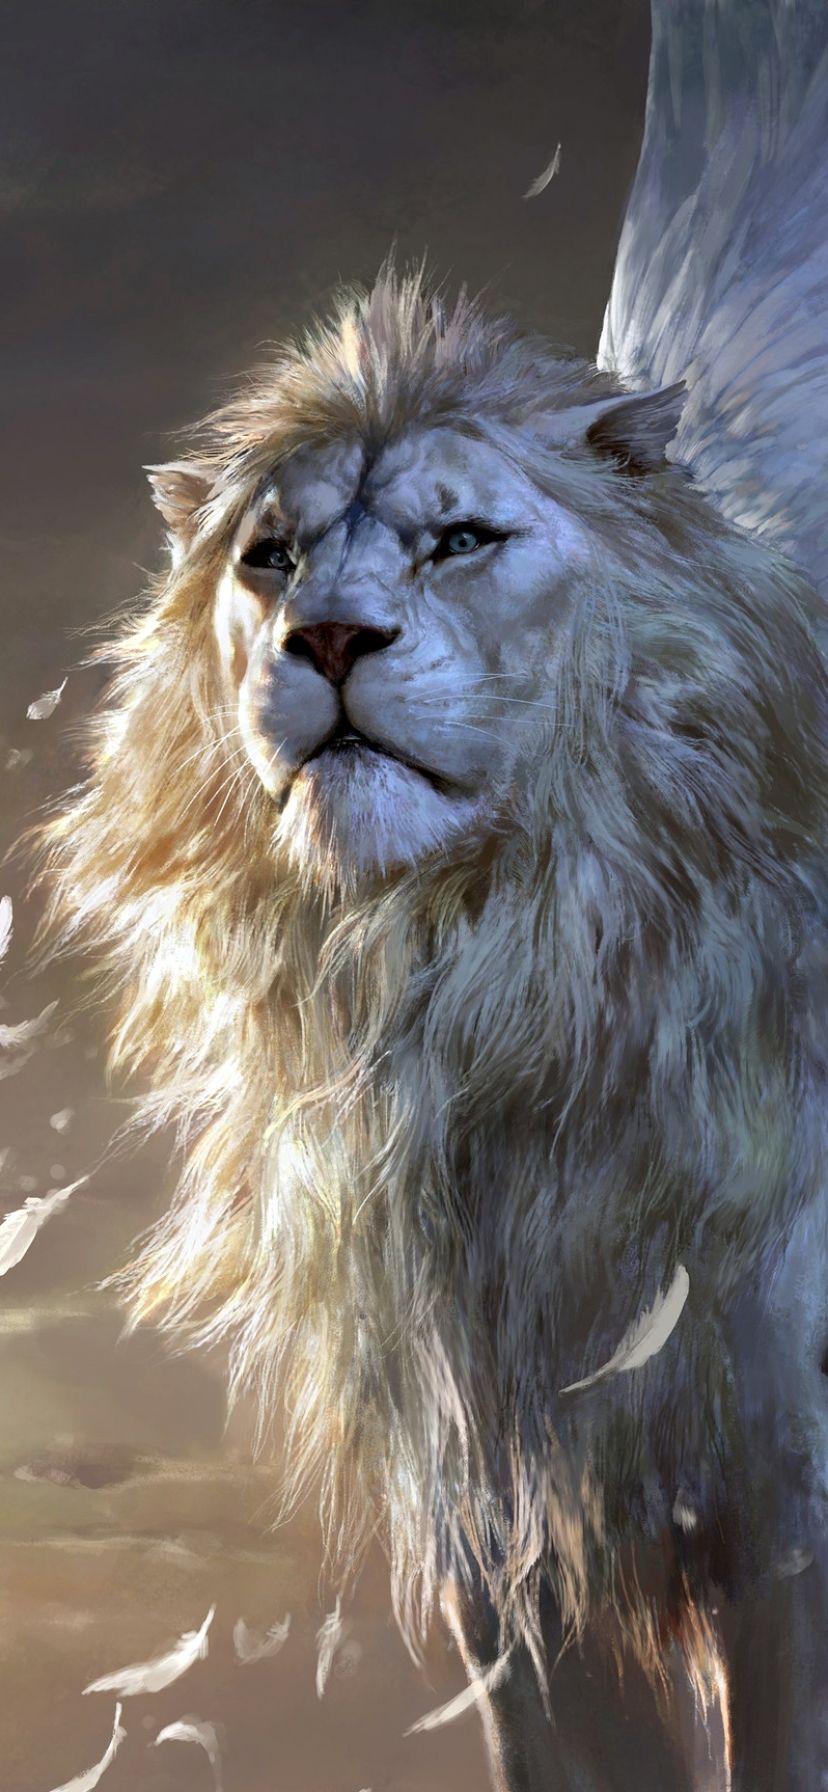 A white lion with wings and feathers - Lion